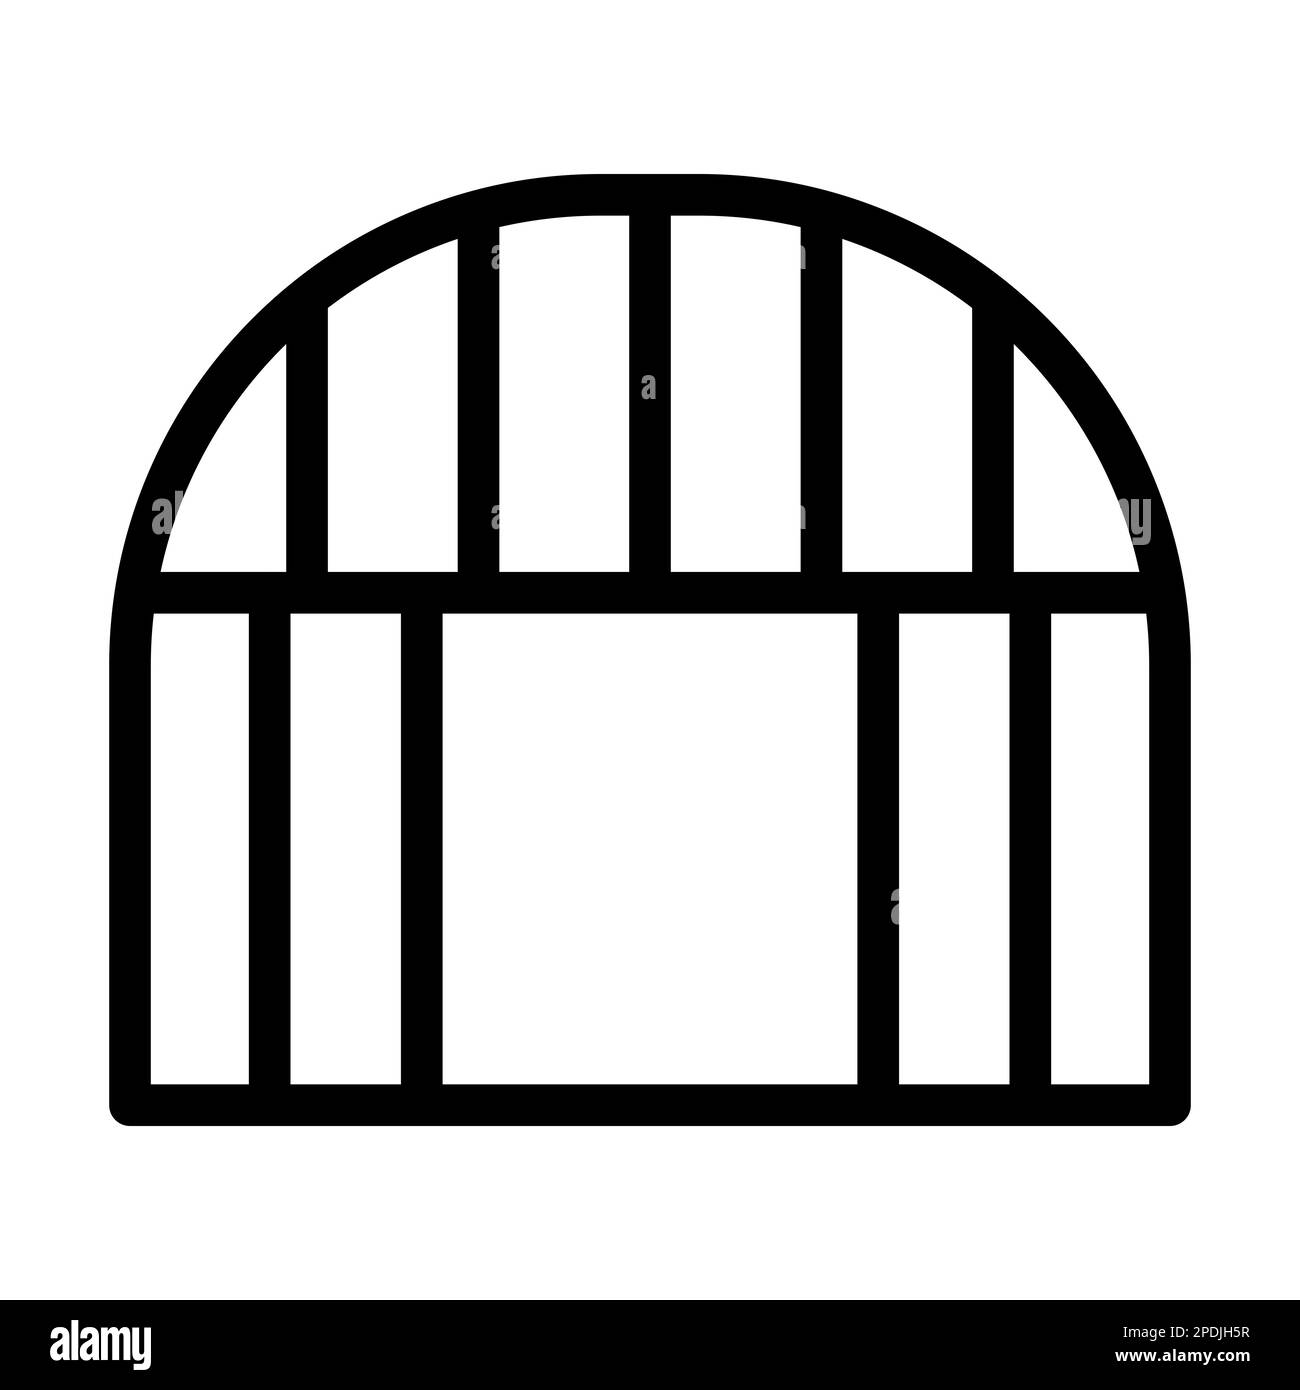 Hangar Vector Thick Line Icon For Personal And Commercial Use. Stock Photo